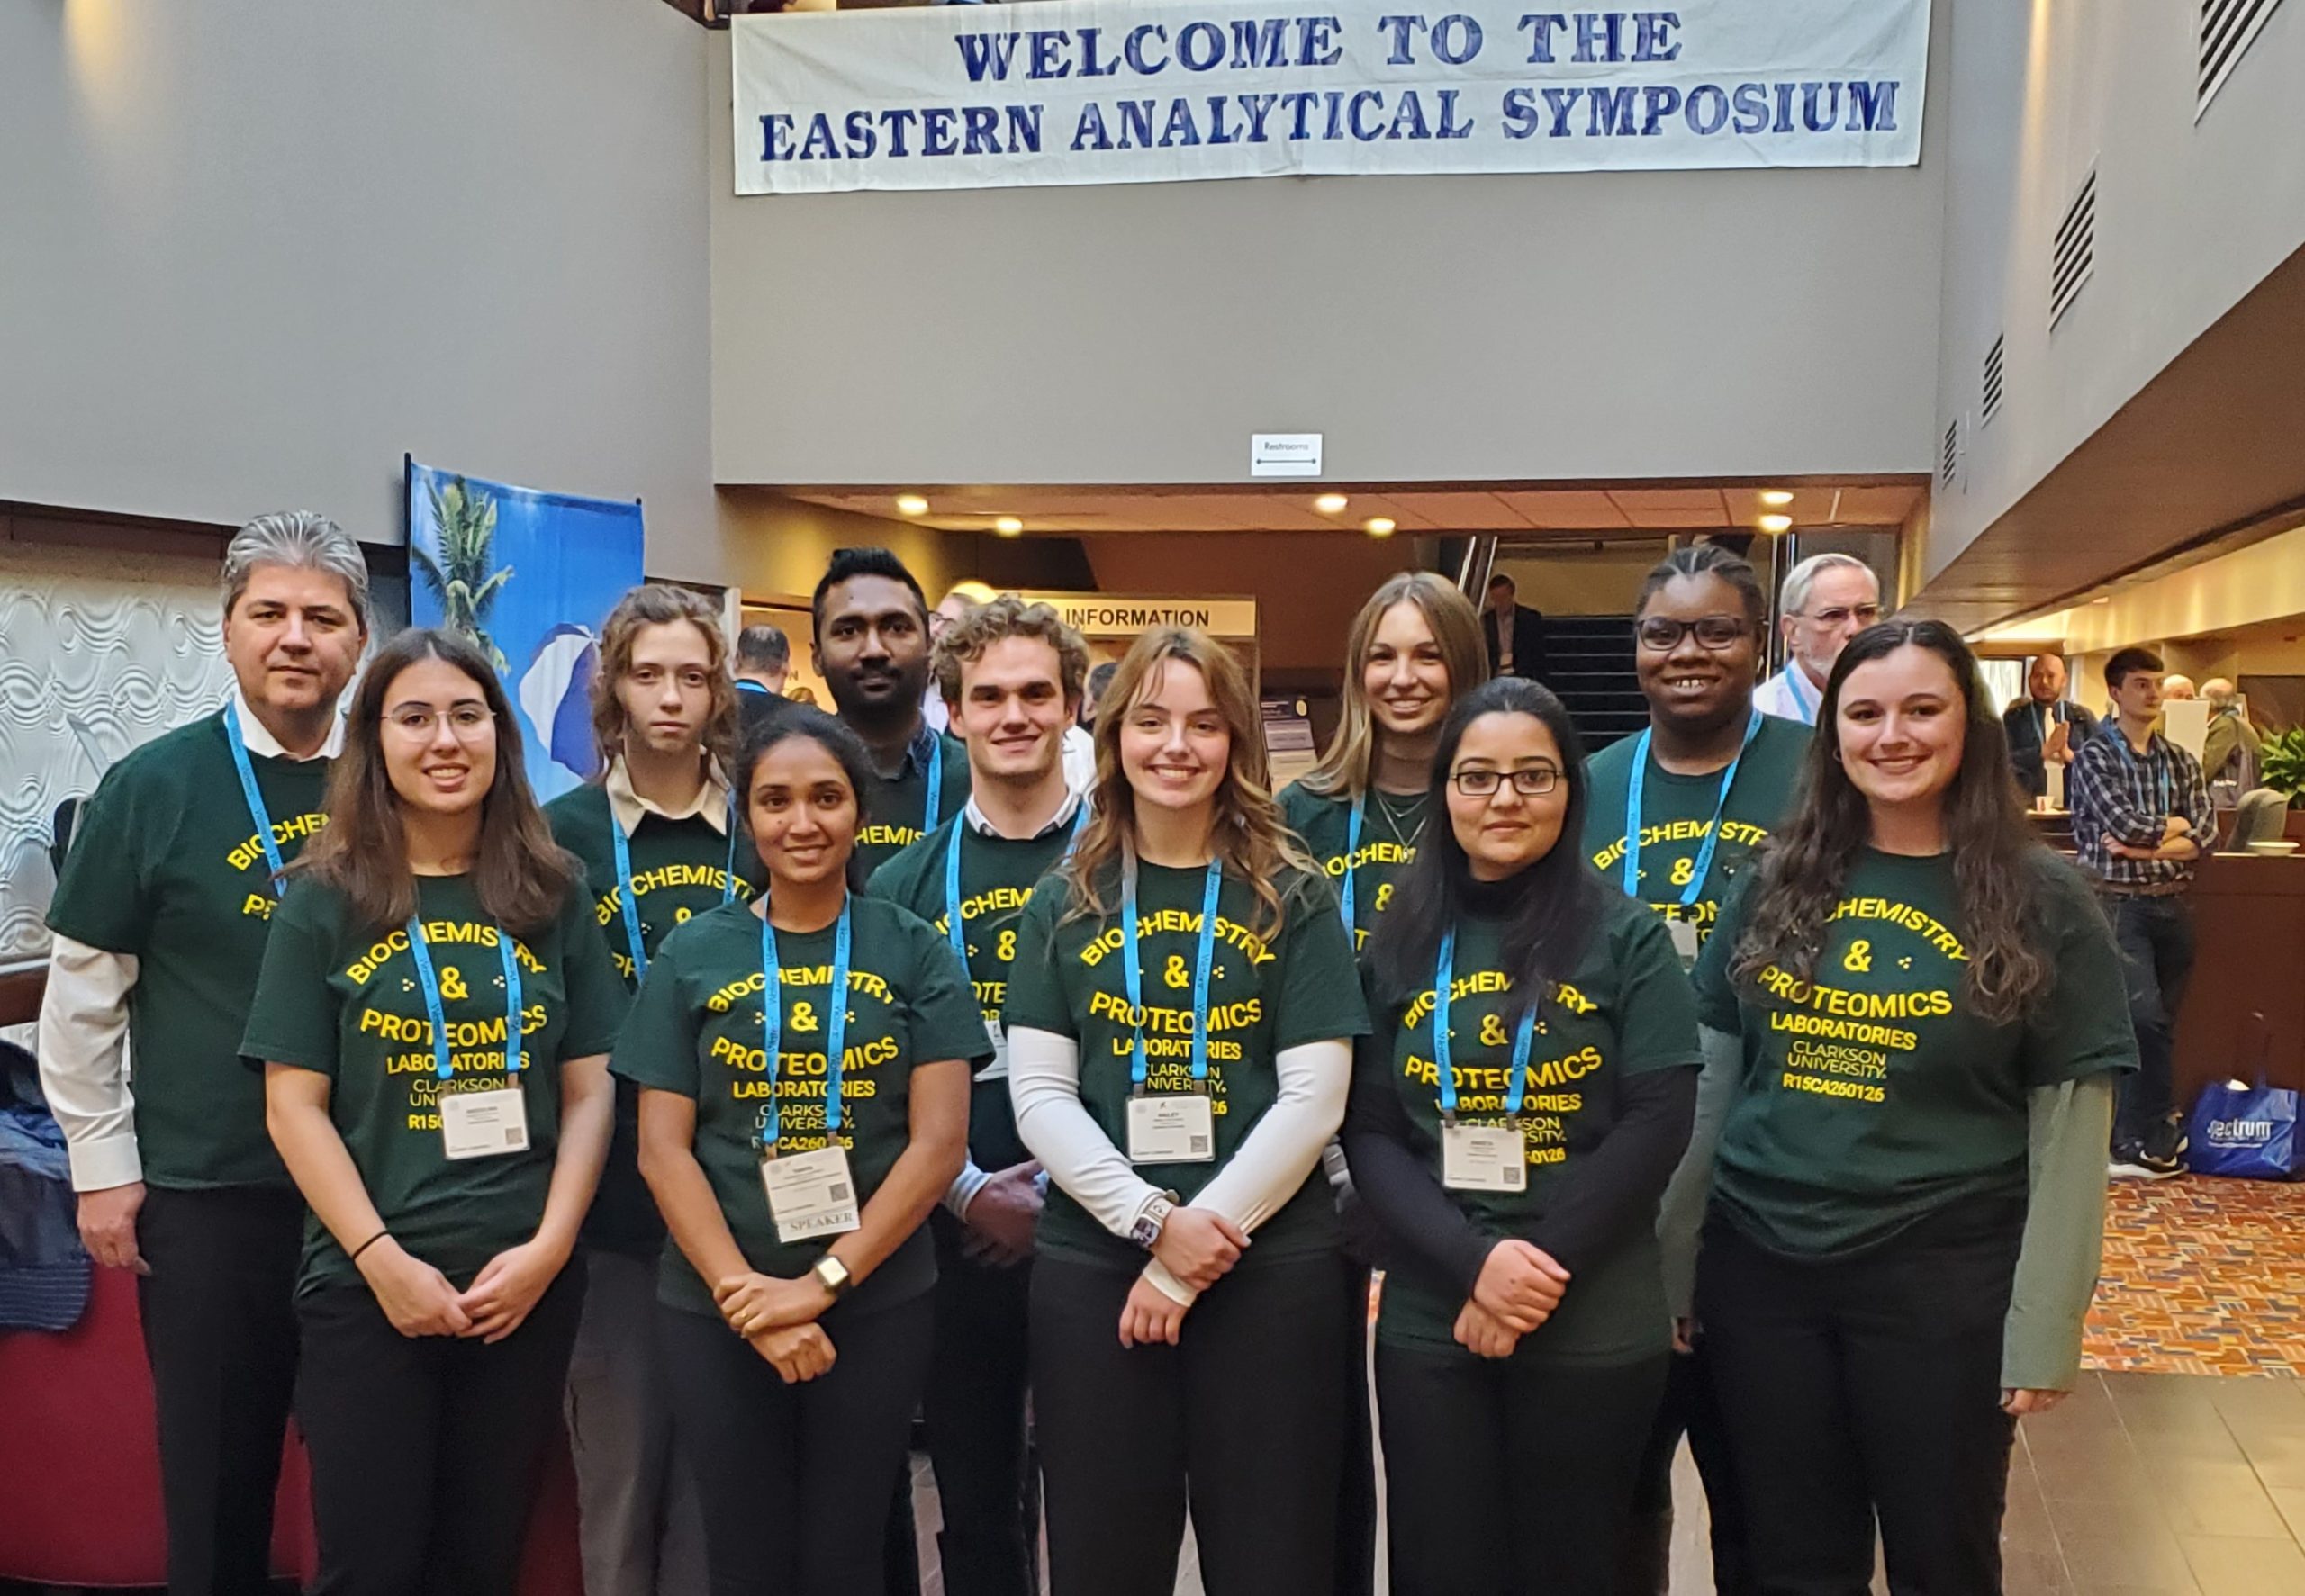 Photo of conference attendees posing during the conference. Photo from left to right: Costel C.Darie, Nina Hukovic, Celeste A. Darie, Taniya Jayaweera, Krish Weraduwage, Norman Haaker, Hailey Morrissiey, Logan Seymour, Aneeta Arshad, Pathea Bruno and Danielle Whitham